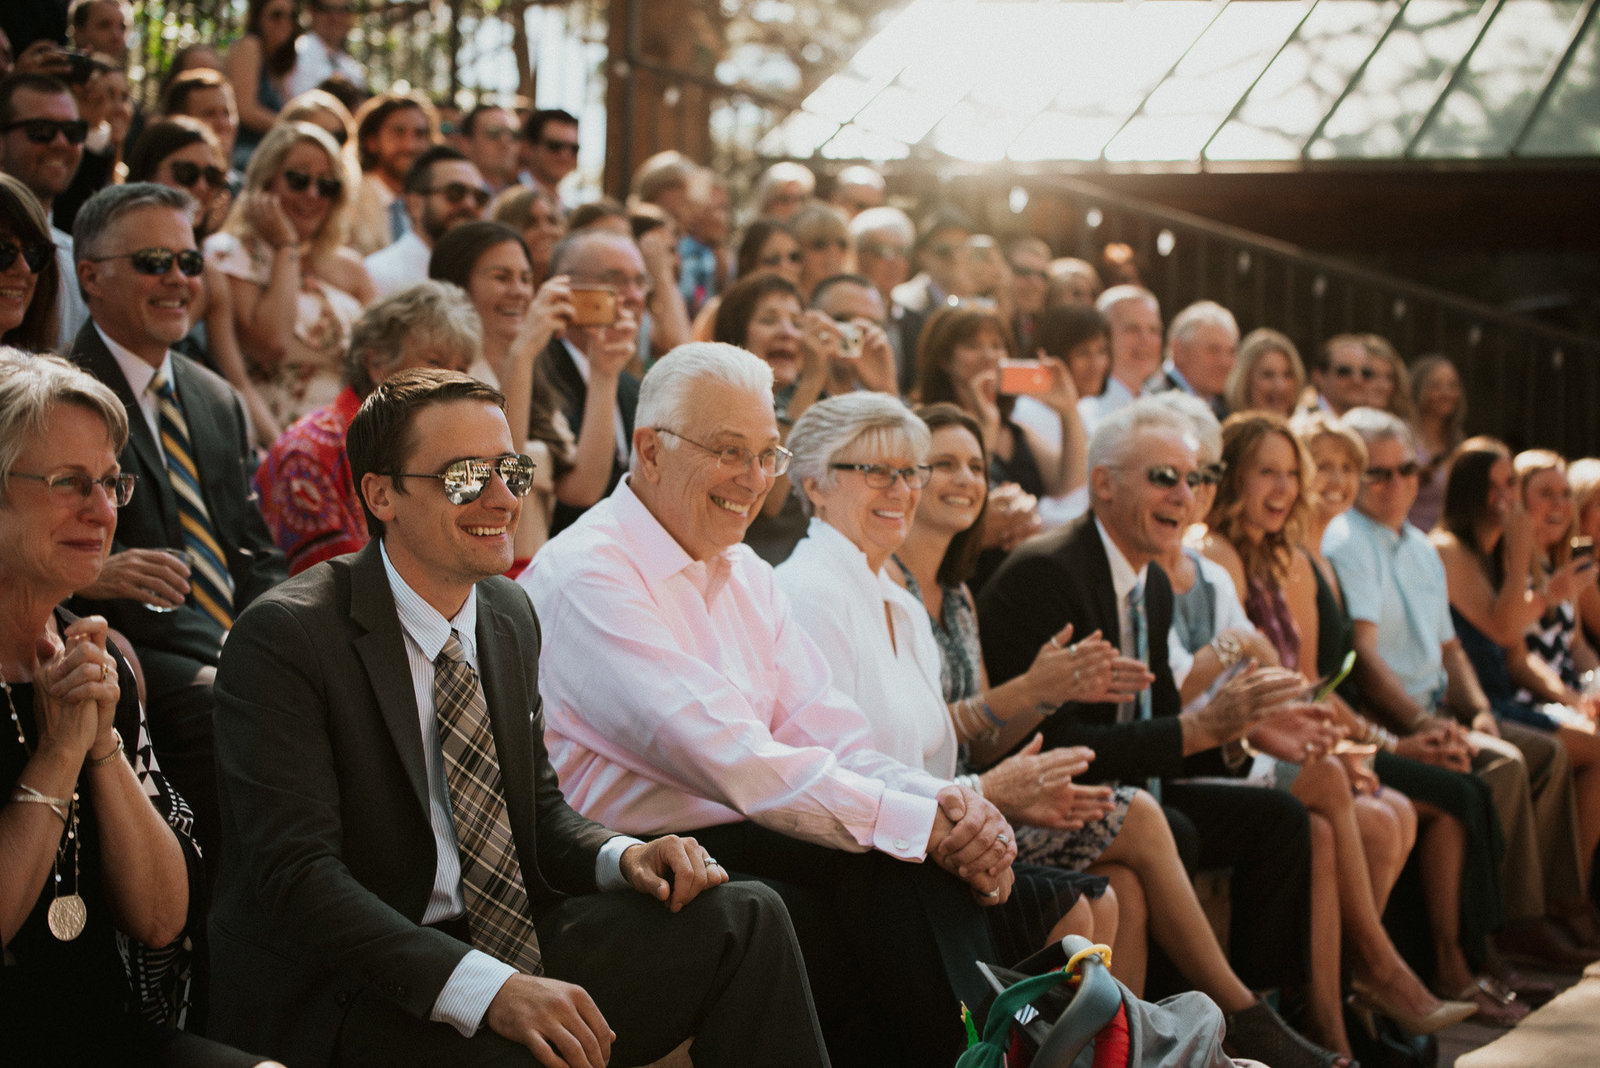 picture of wedding attendees taken by professional denver photographer